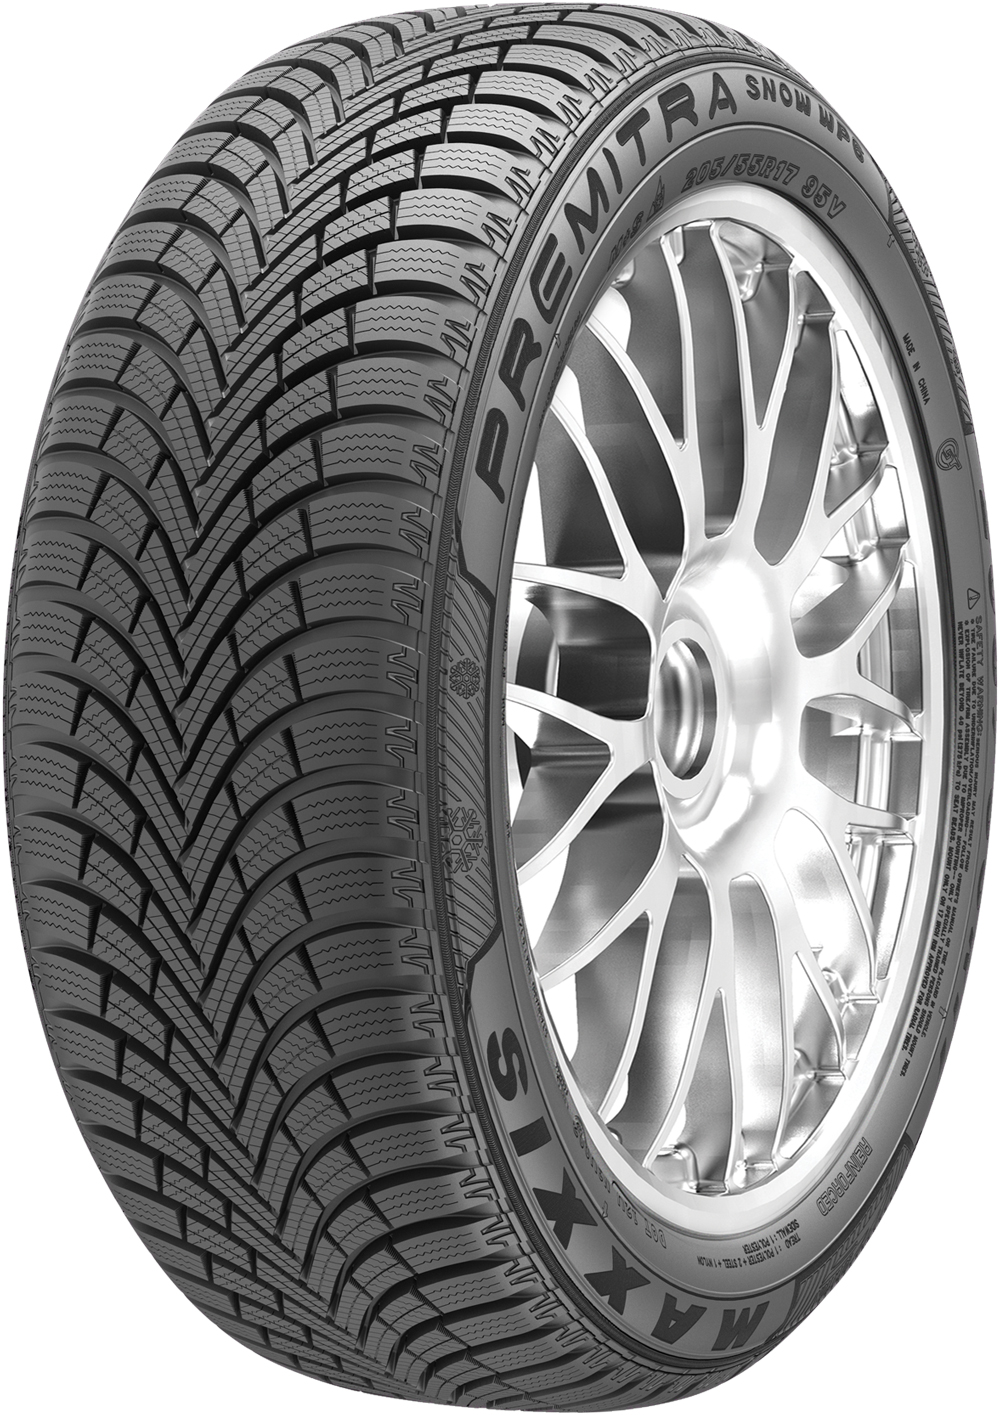 Anvelope auto MAXXIS WP6 XL 175/65 R14 86T